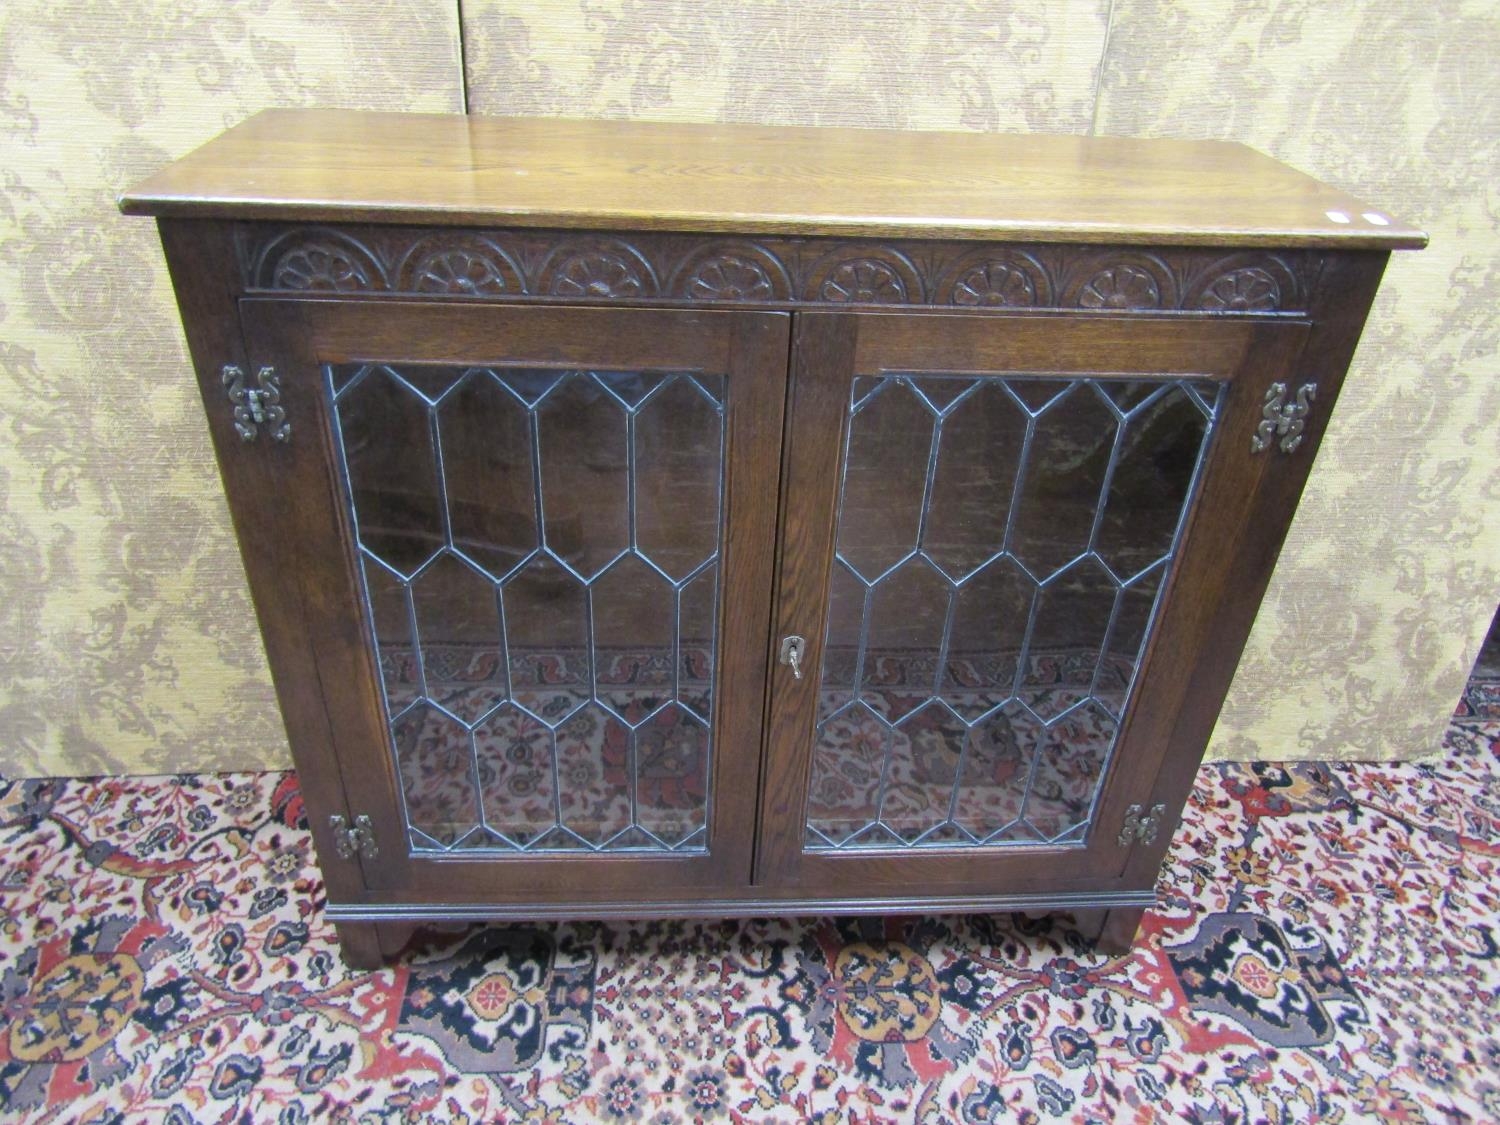 A glass-fronted cabinet, twin door with key